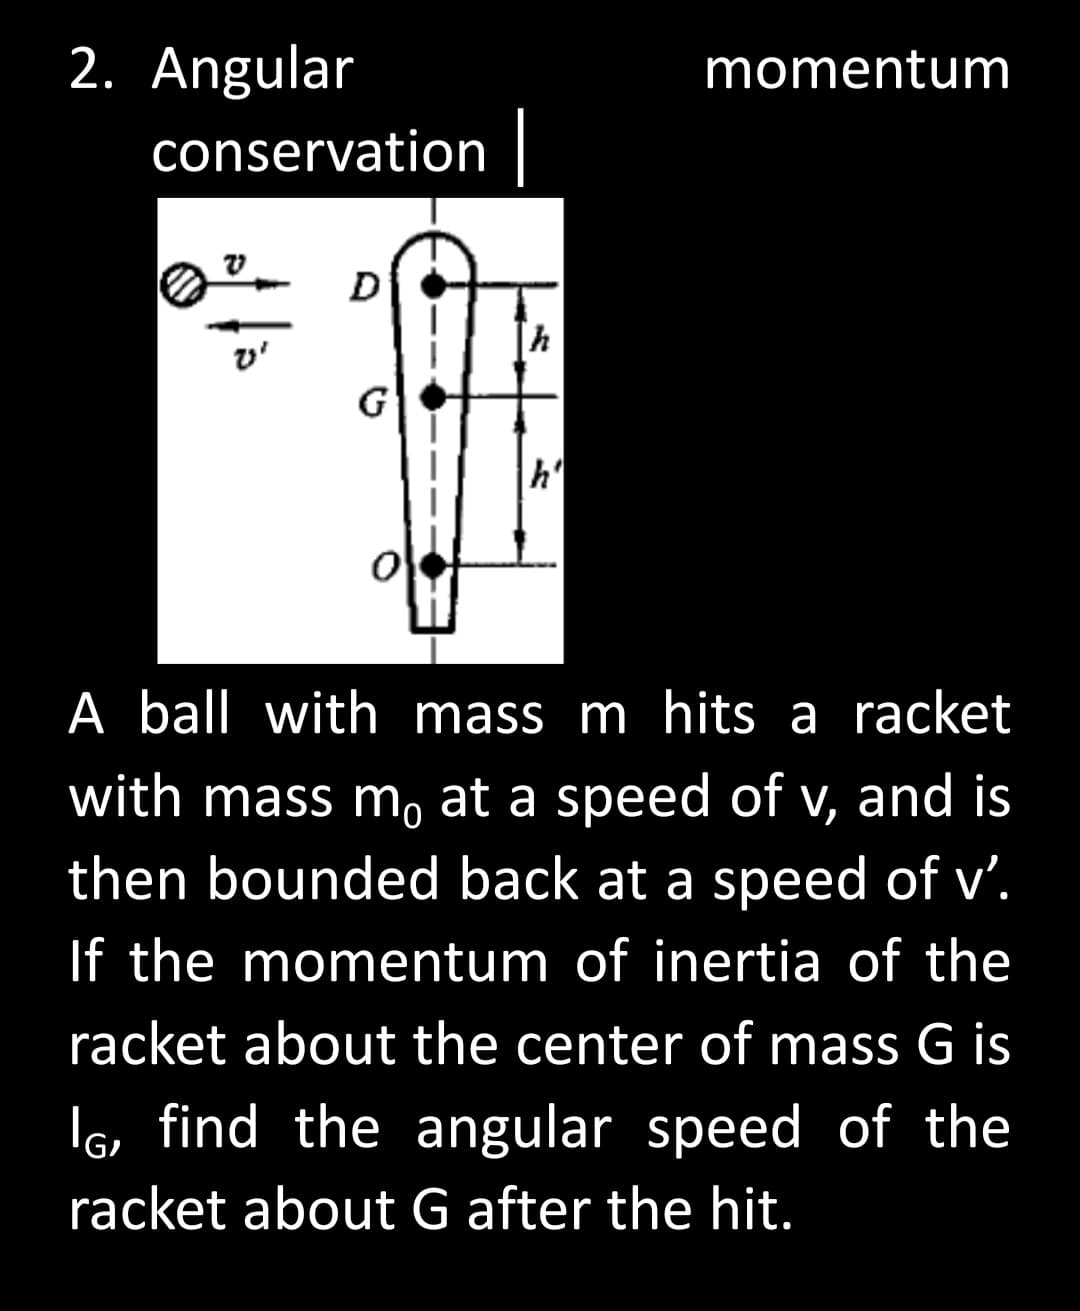 2. Angular
momentum
conservation
D
h
v'
G
h'
A ball with mass m hits a racket
with mass m, at a speed of v, and is
then bounded back at a speed of v'.
If the momentum of inertia of the
racket about the center of mass G is
I, find the angular speed of the
racket about G after the hit.
